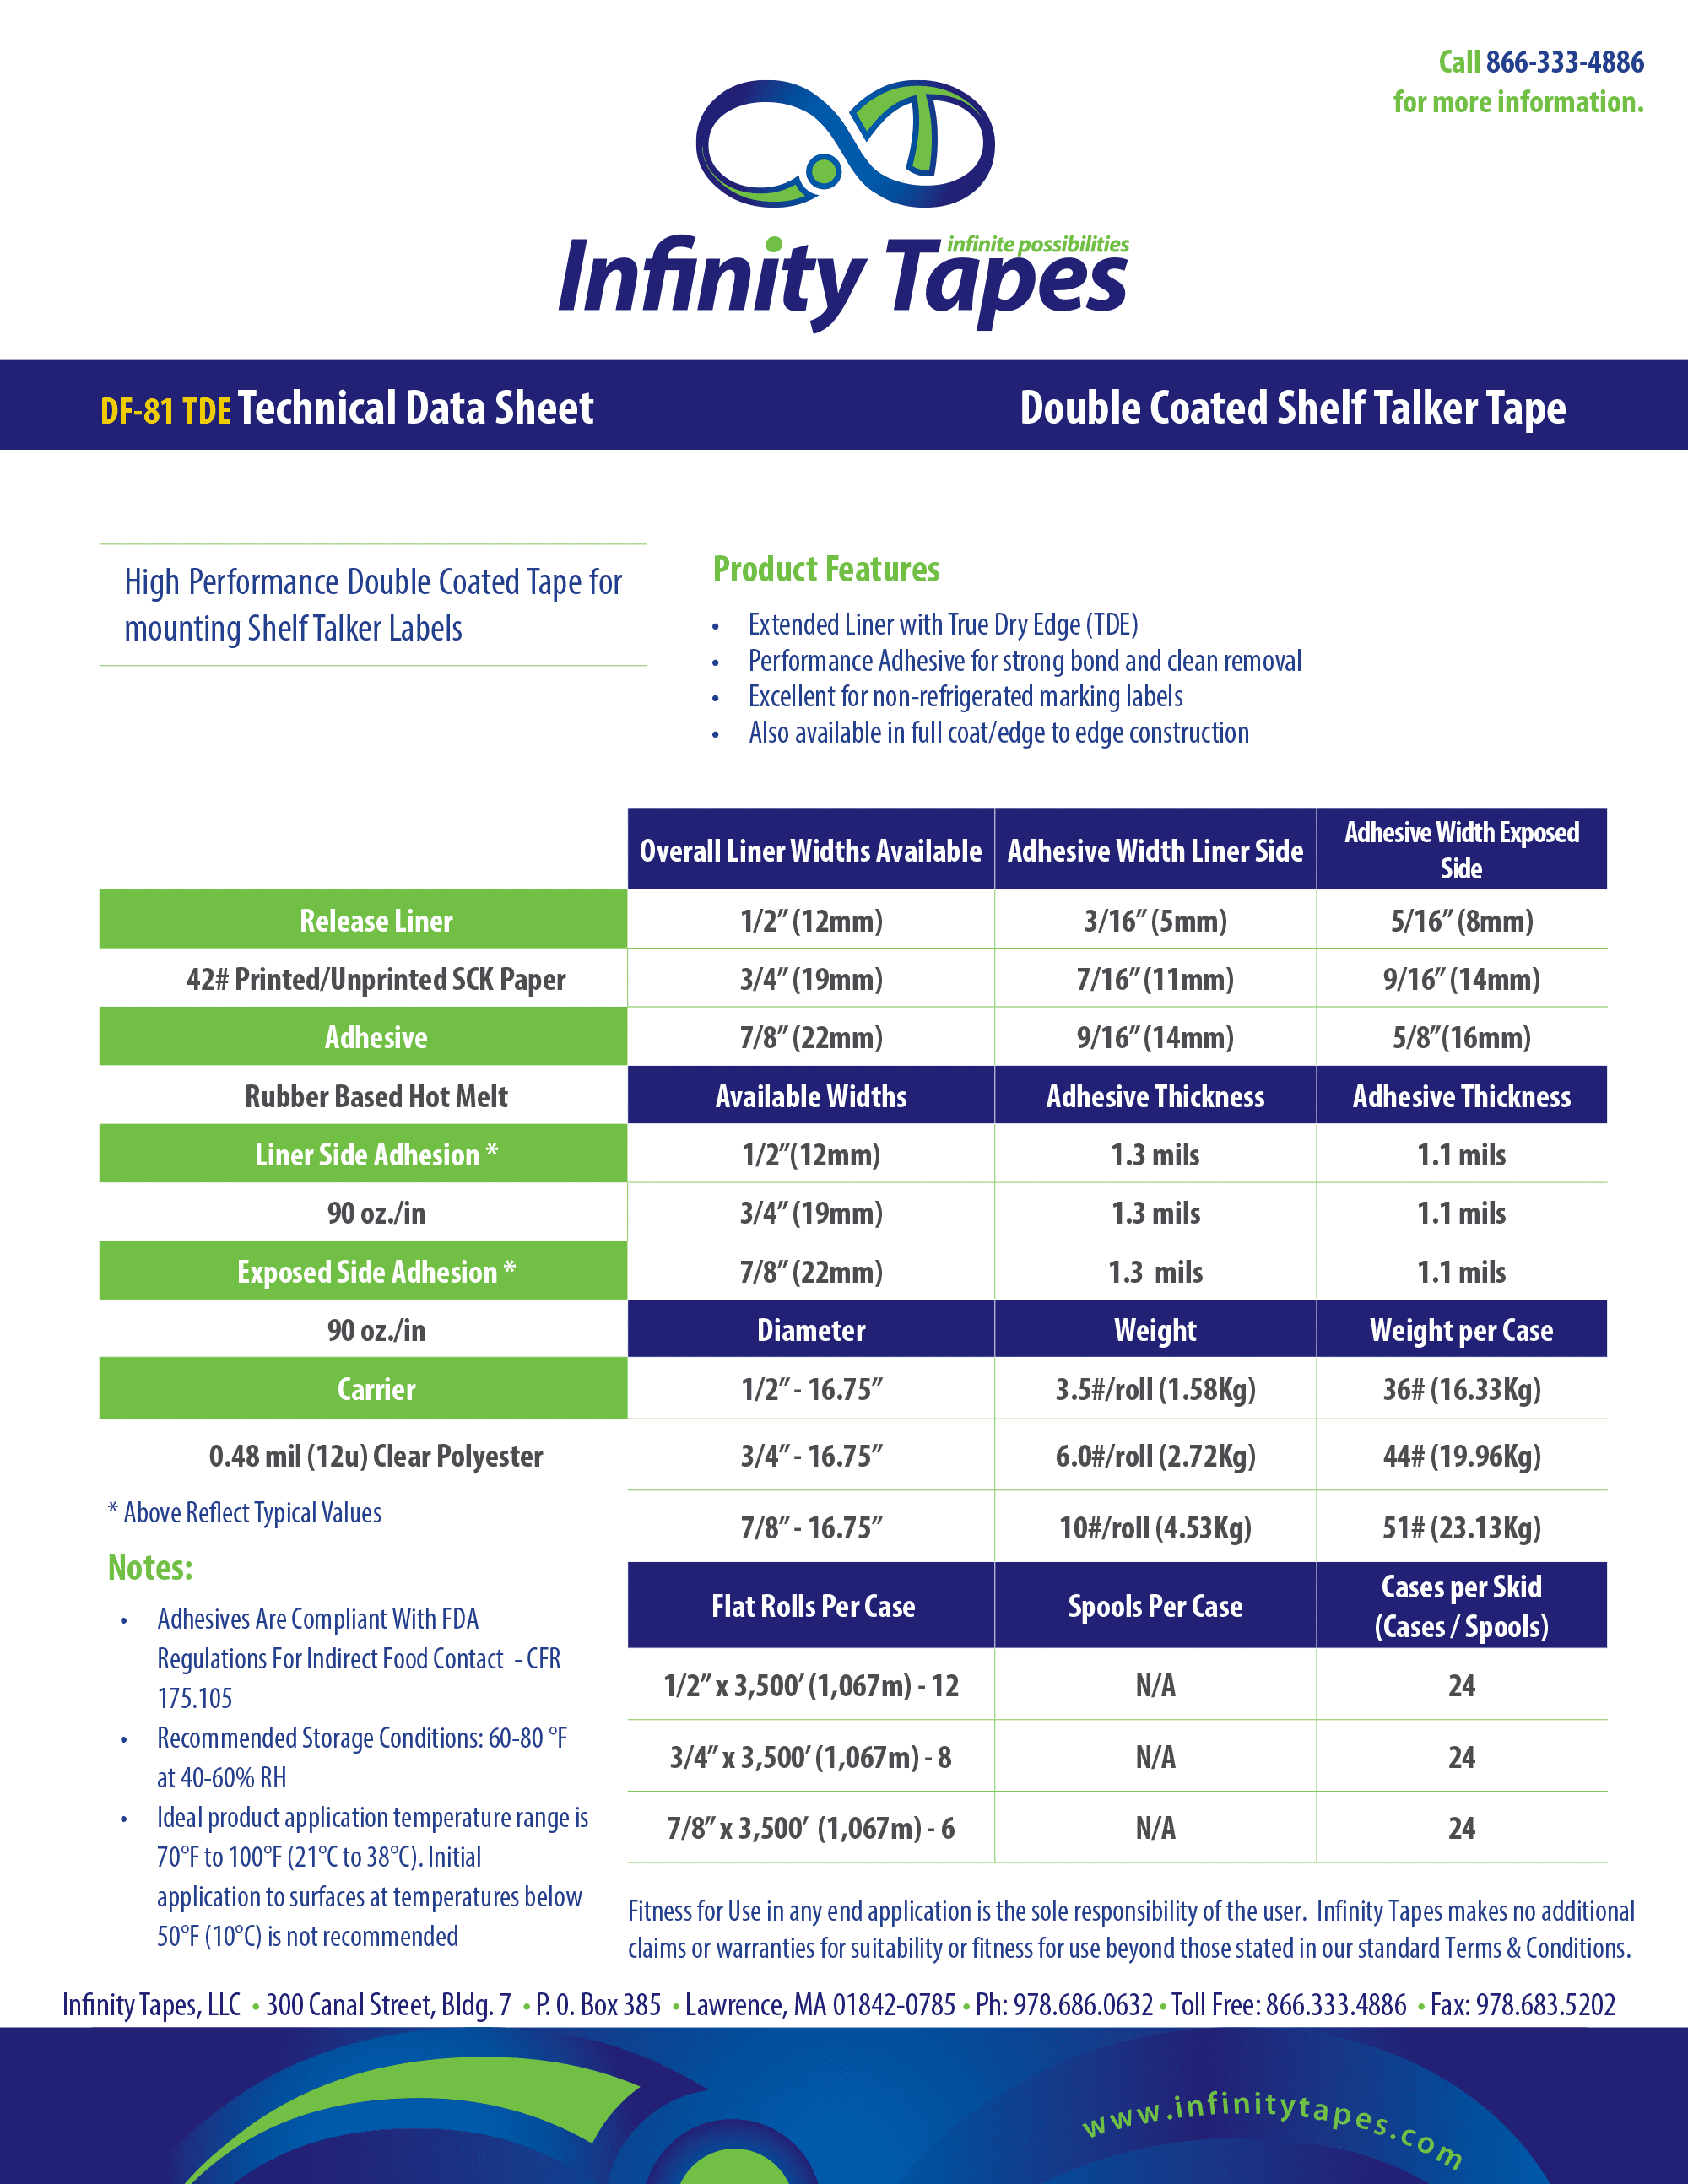 Infinity Tapes